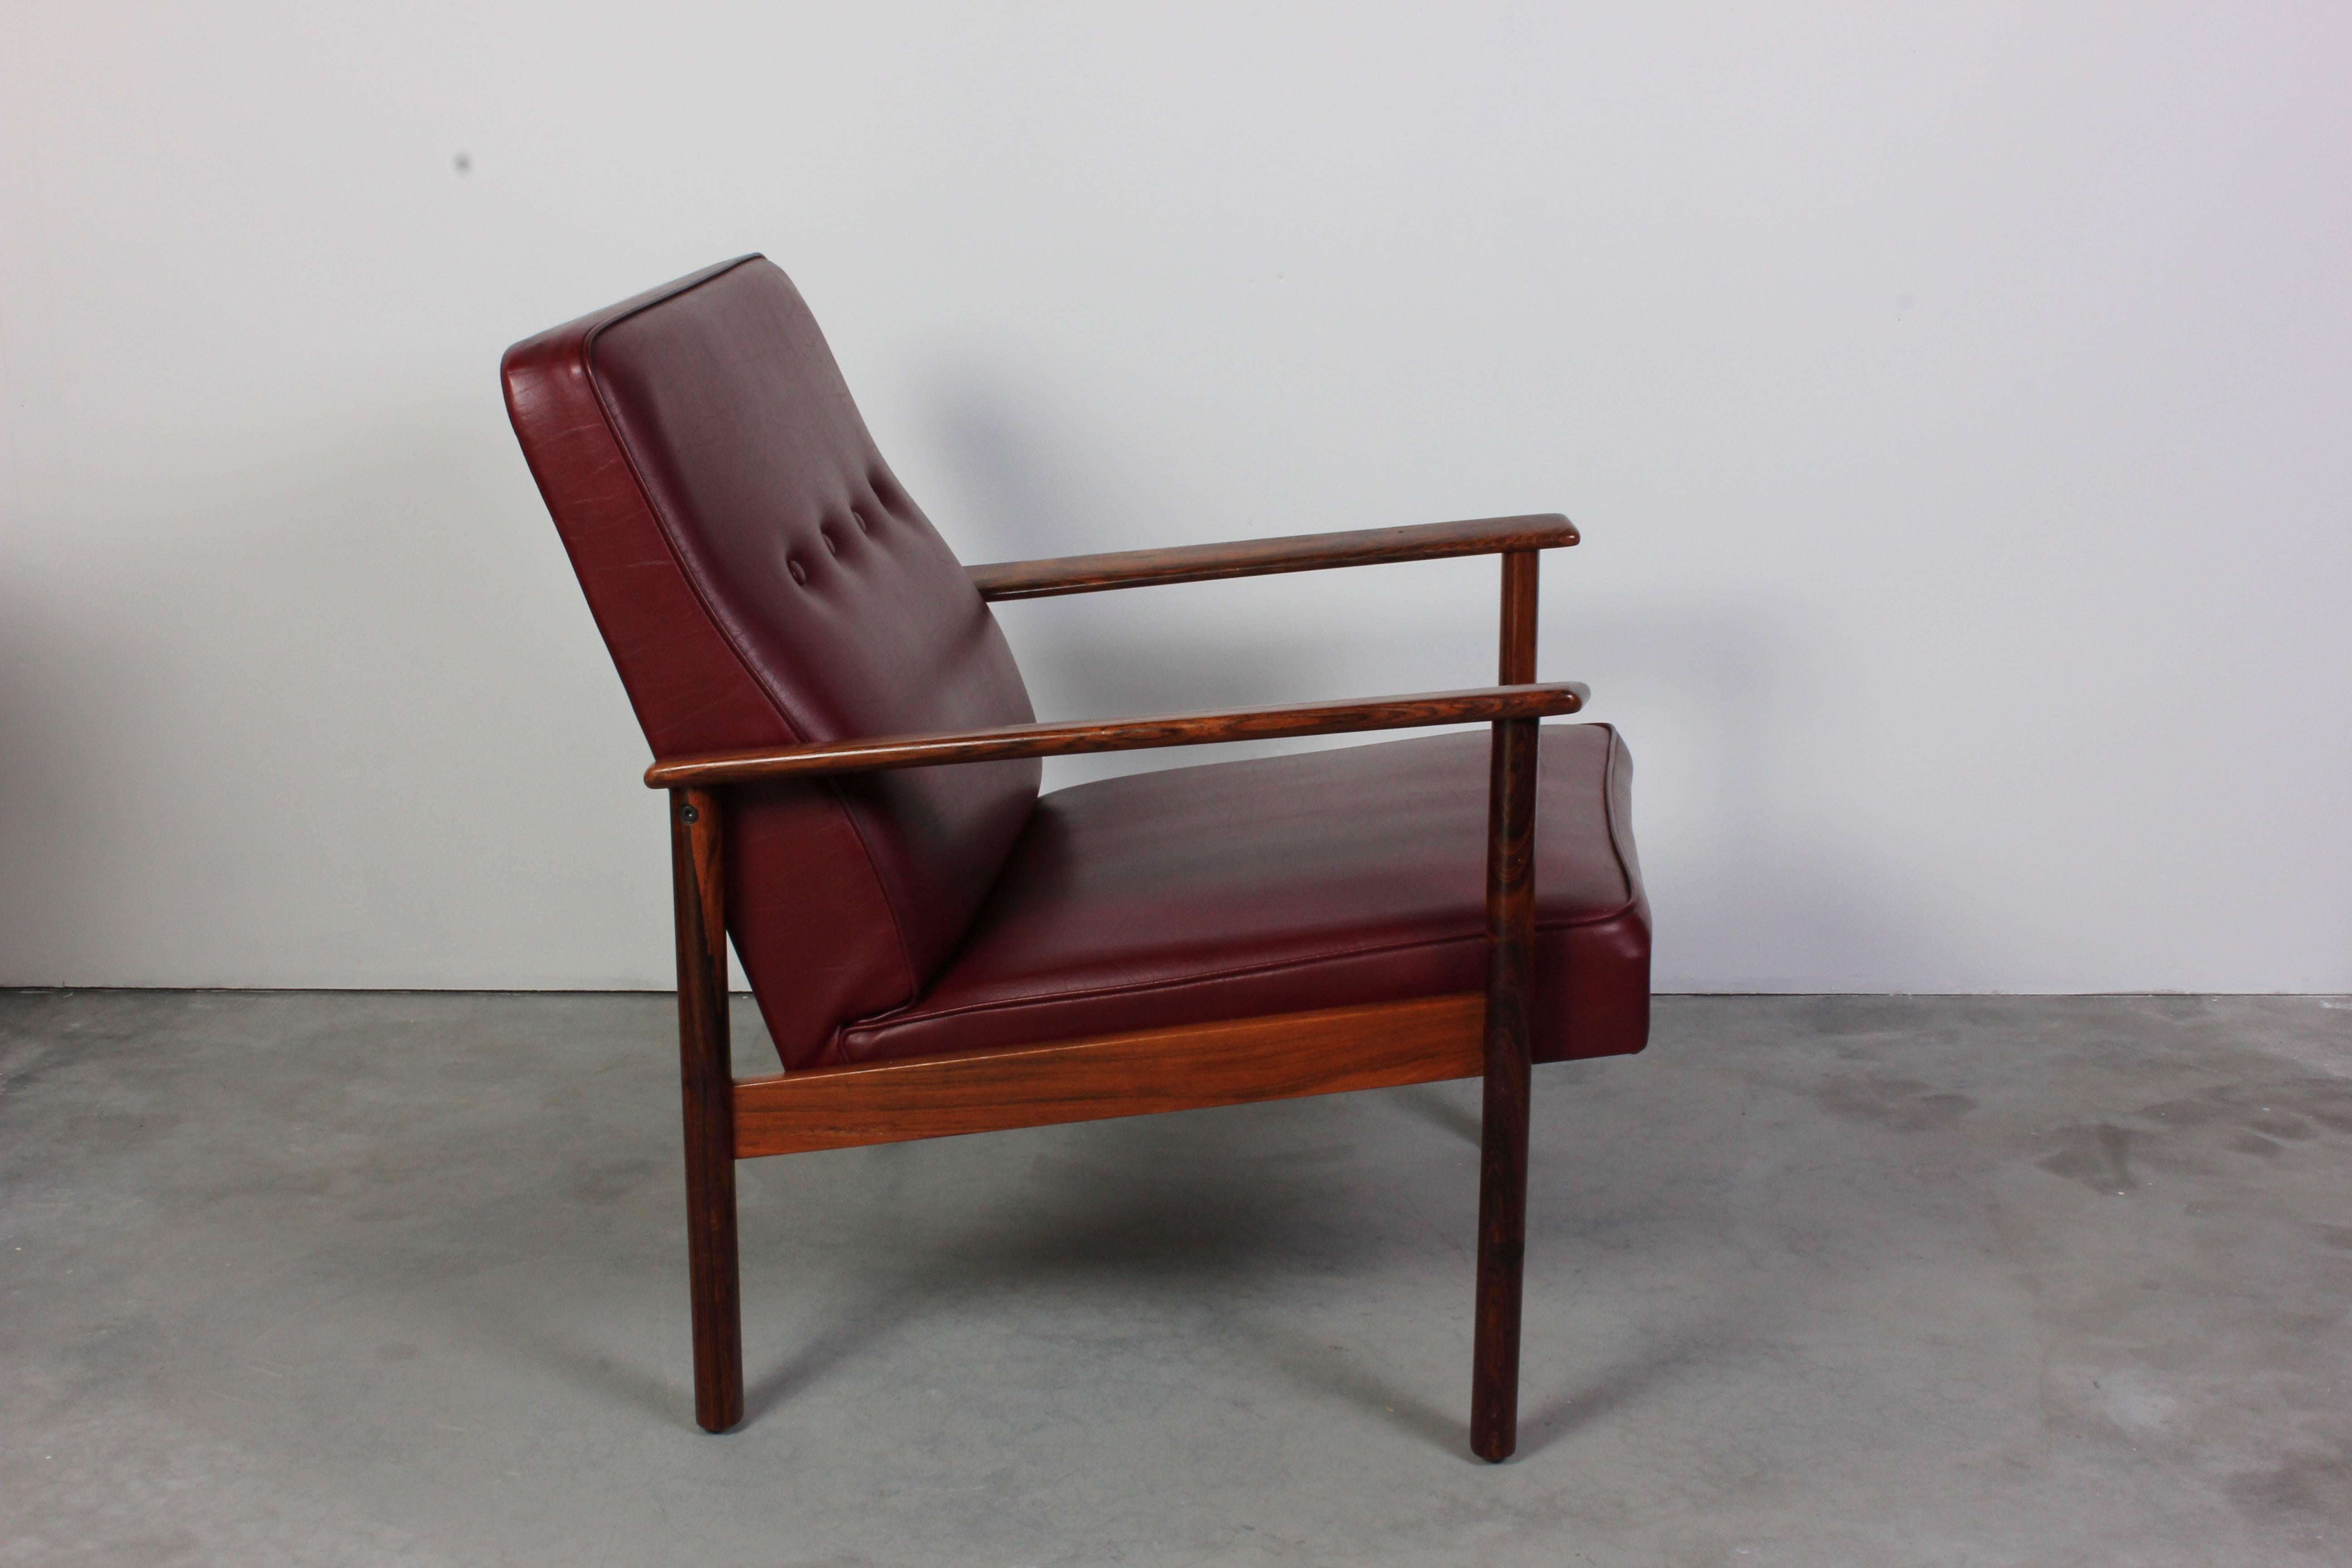 Midcentury rosewood lounge chair by unknown scandinavian designer. The chair is made out of rosewood with nice grain and original leatherette upholstery. The chair is in very good vintage condition with minor signs of usage (small signs on